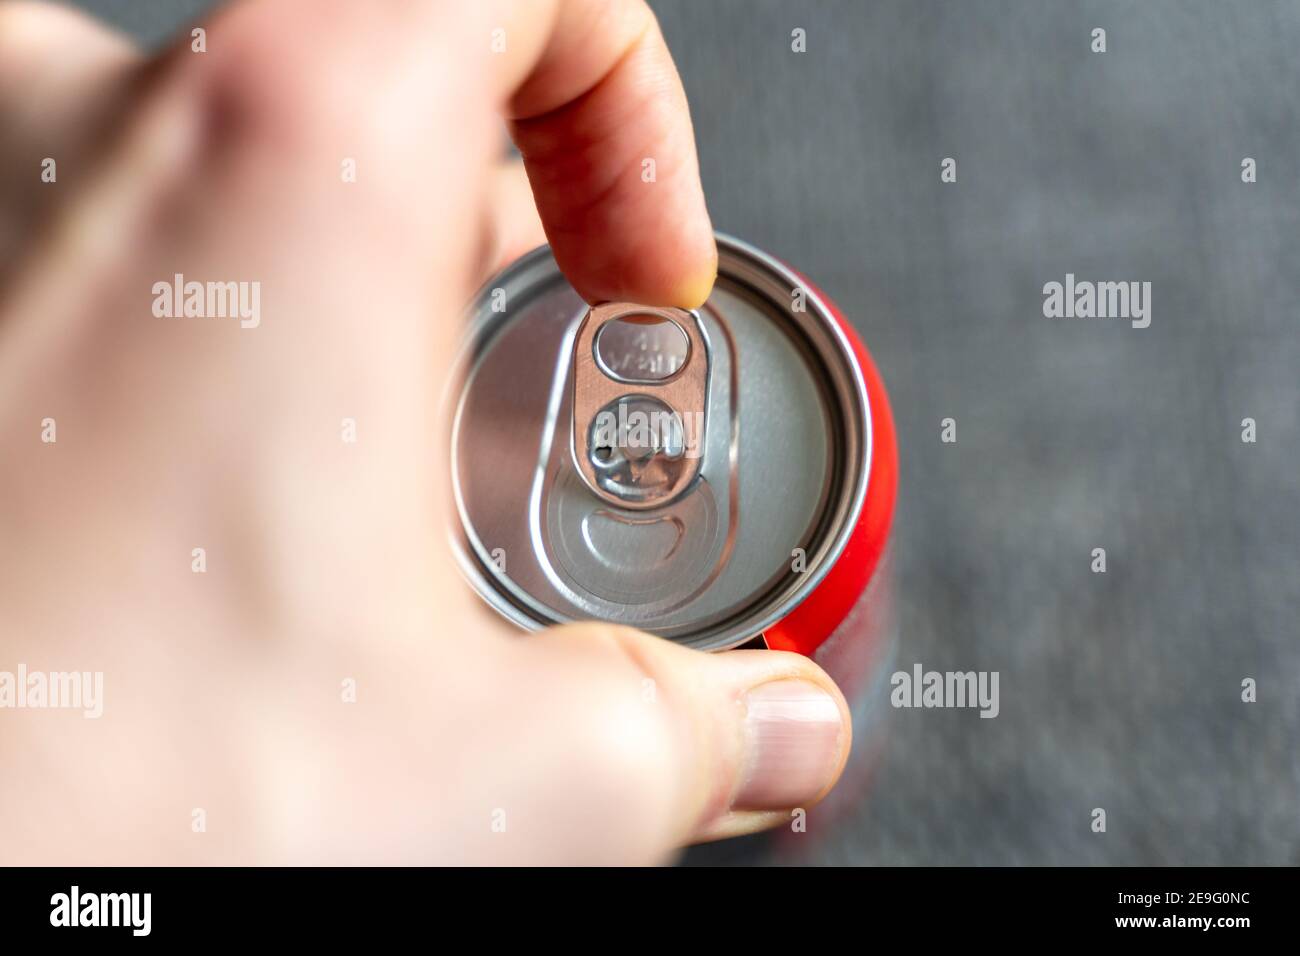 Pulling the tab of a beverage can with a left male hand. Opening a refreshment drink like cola or energydrink after a hard day Stock Photo